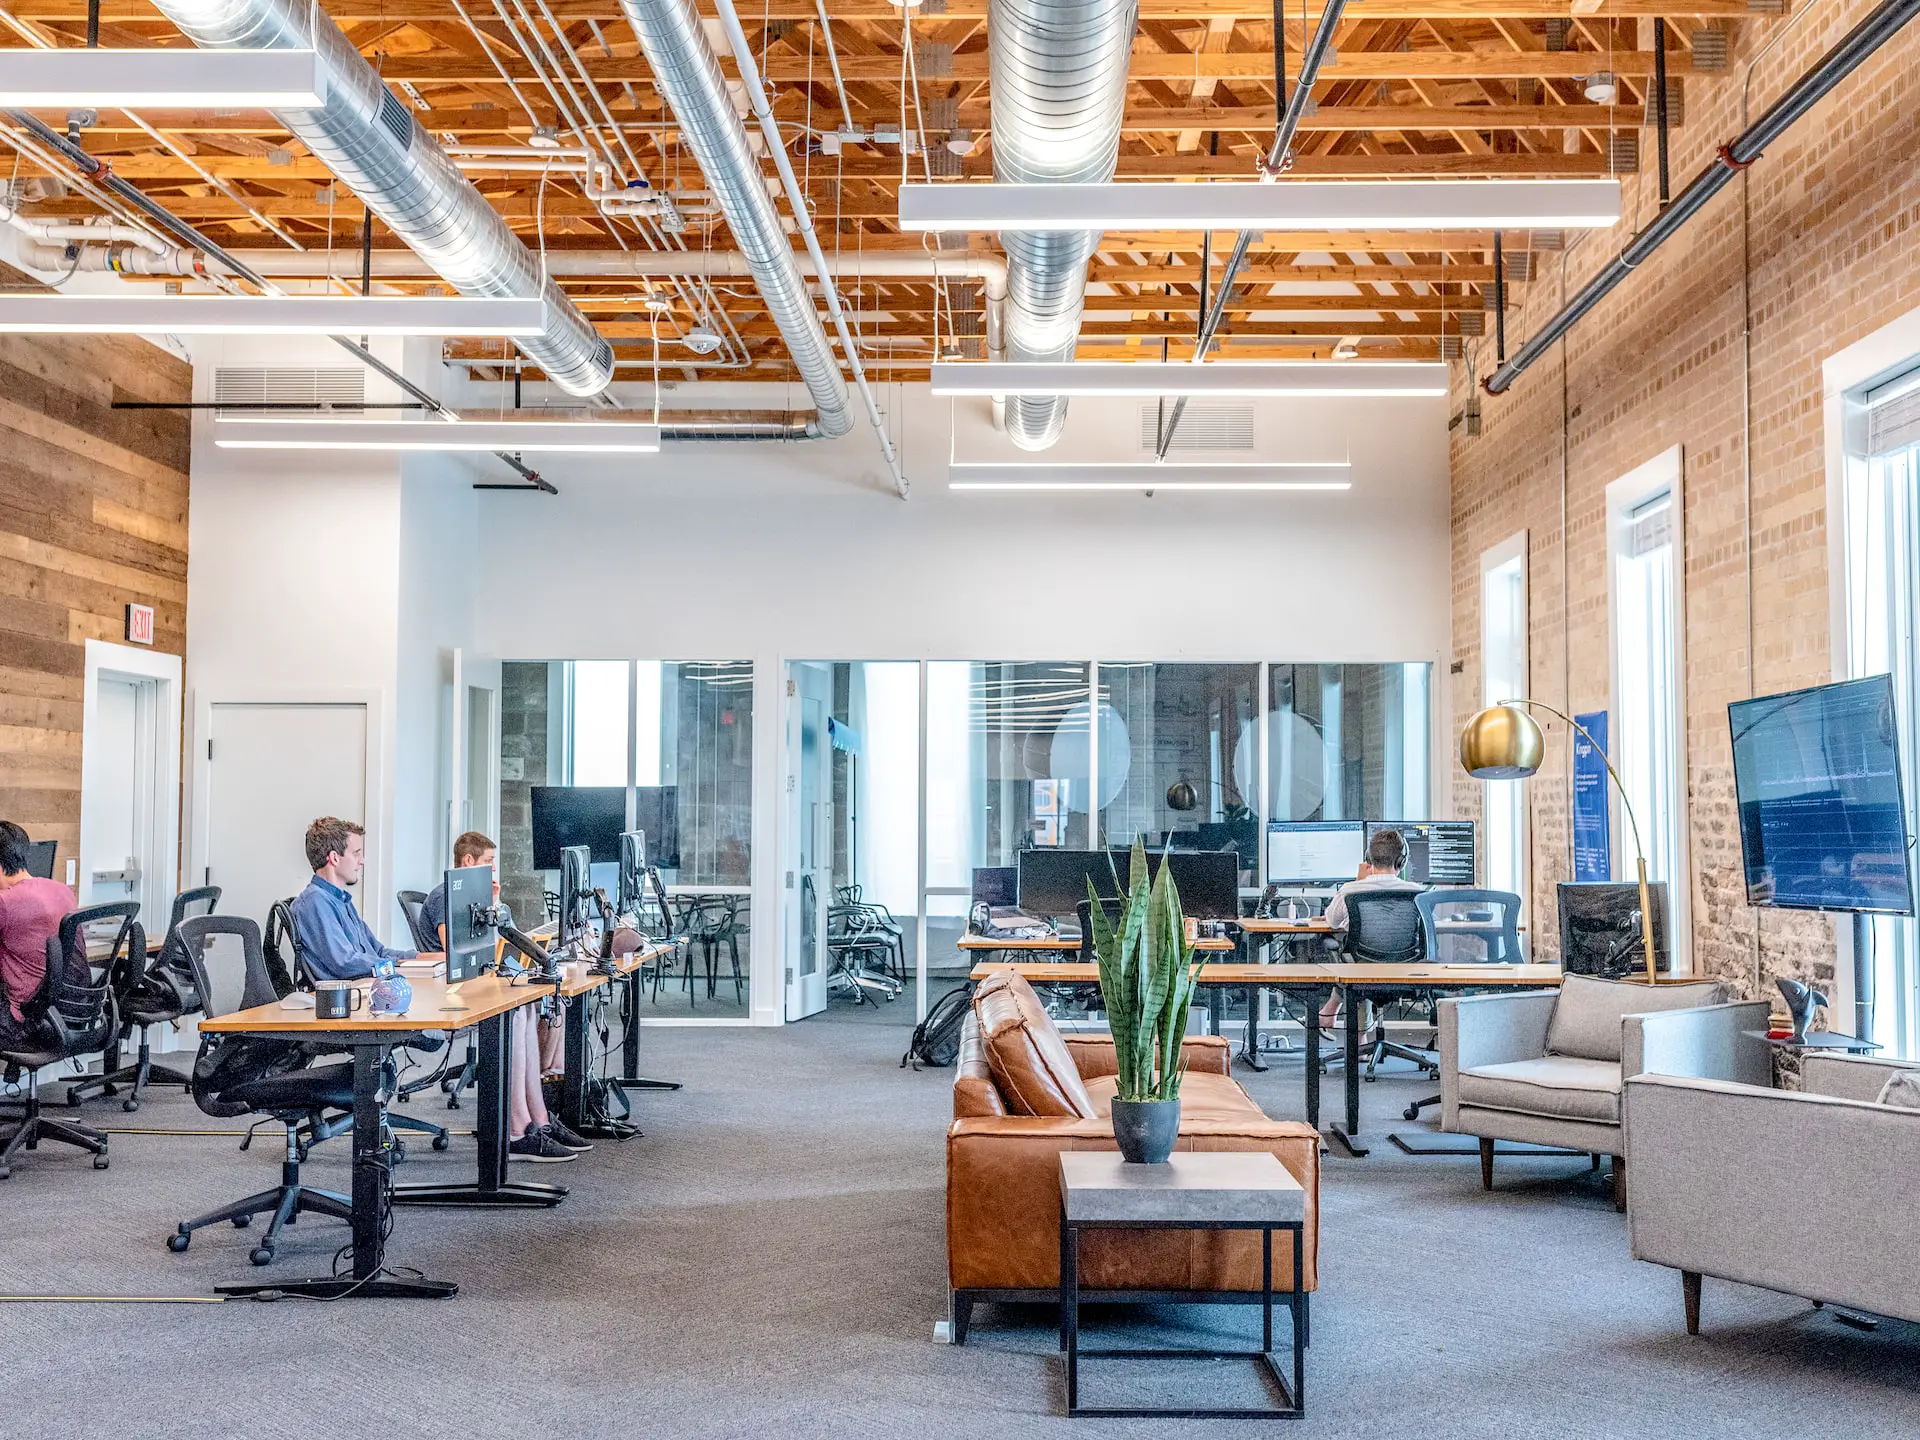 How to Improve Employee Engagement Strategies With Office Designs